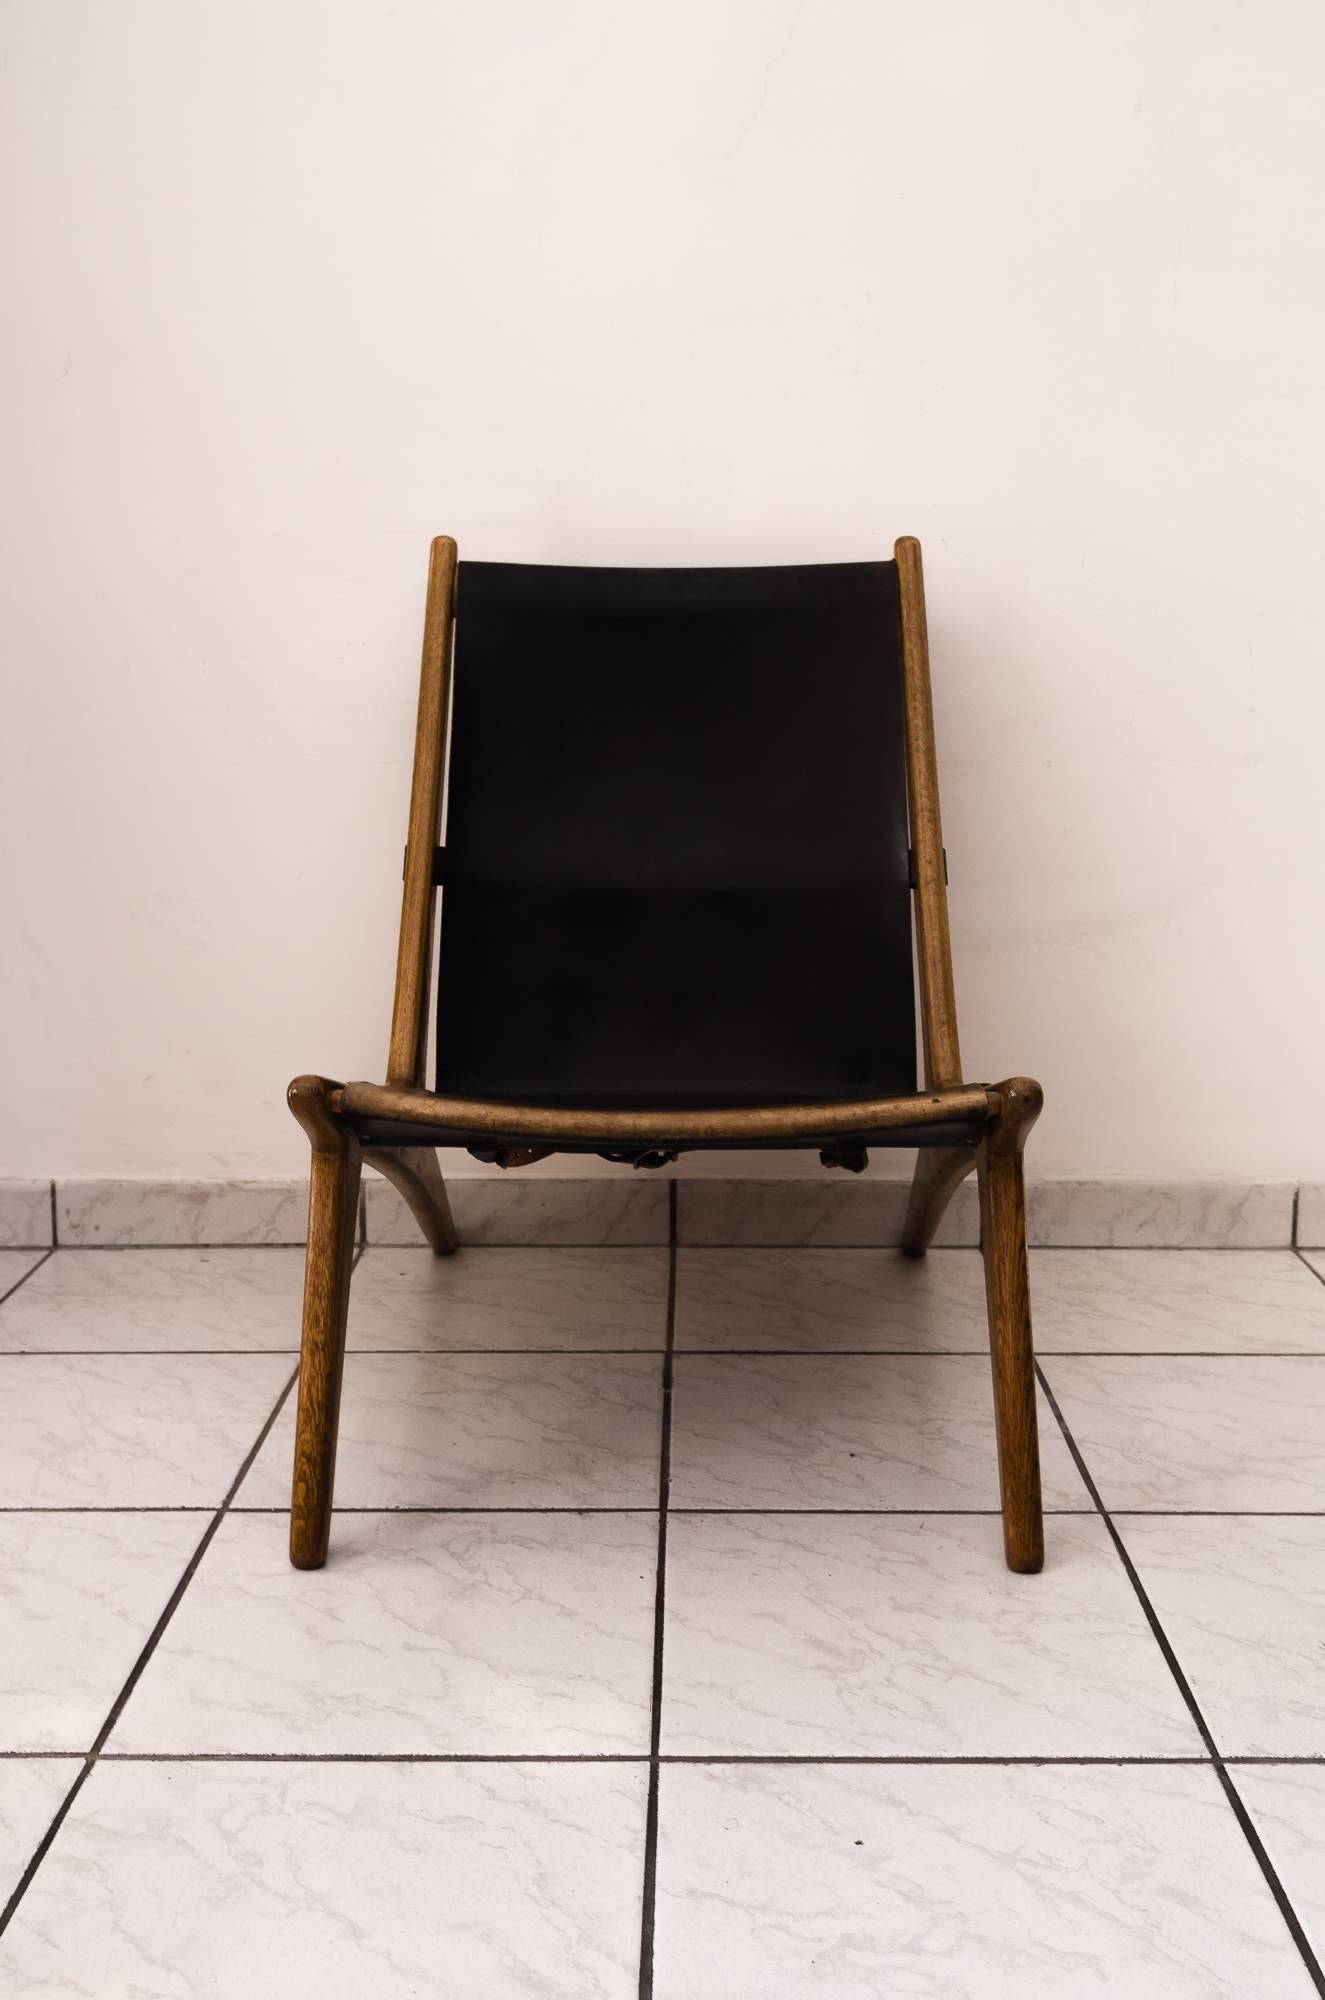 Hunting chair by Uno & Östen Kristiansson
Original condition
trace of use on the leather.